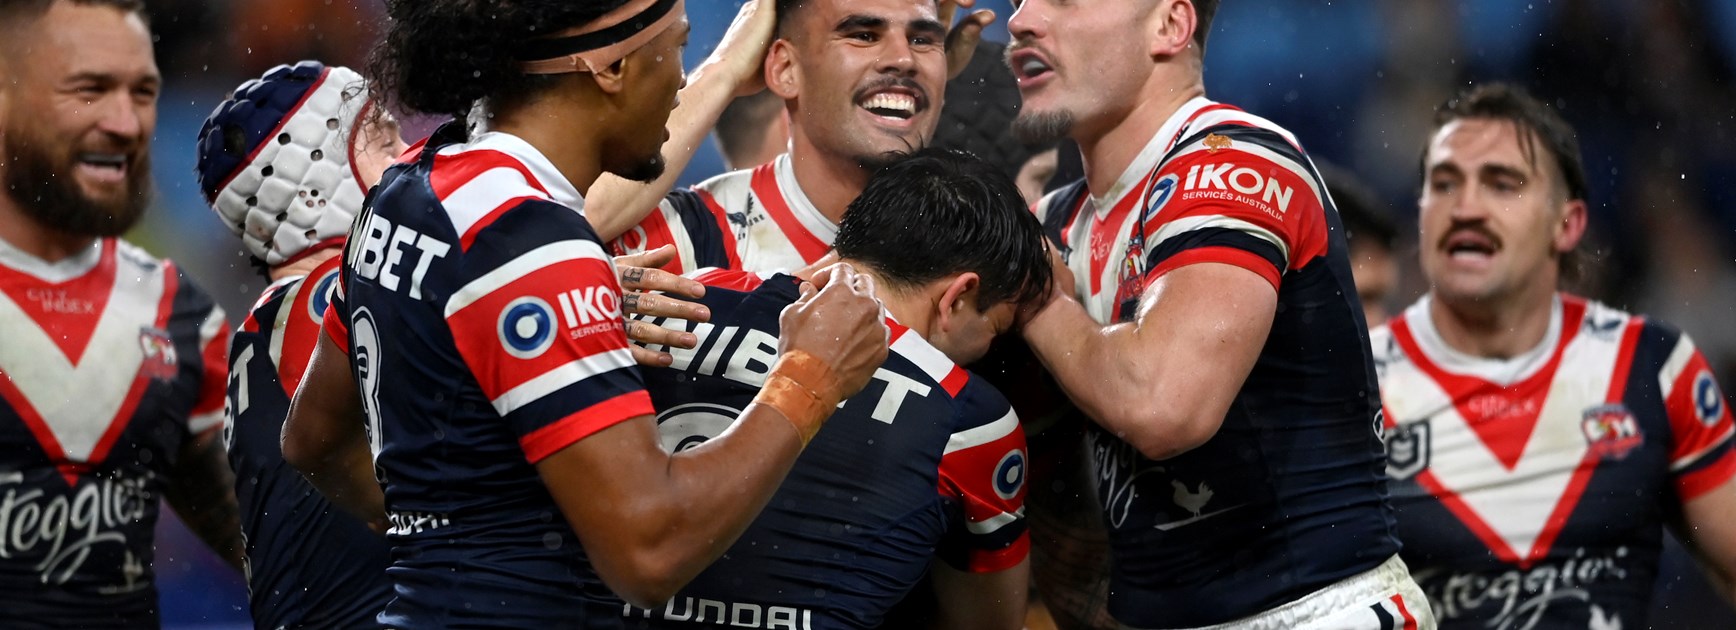 Roosters defy rain in big win over Wests Tigers